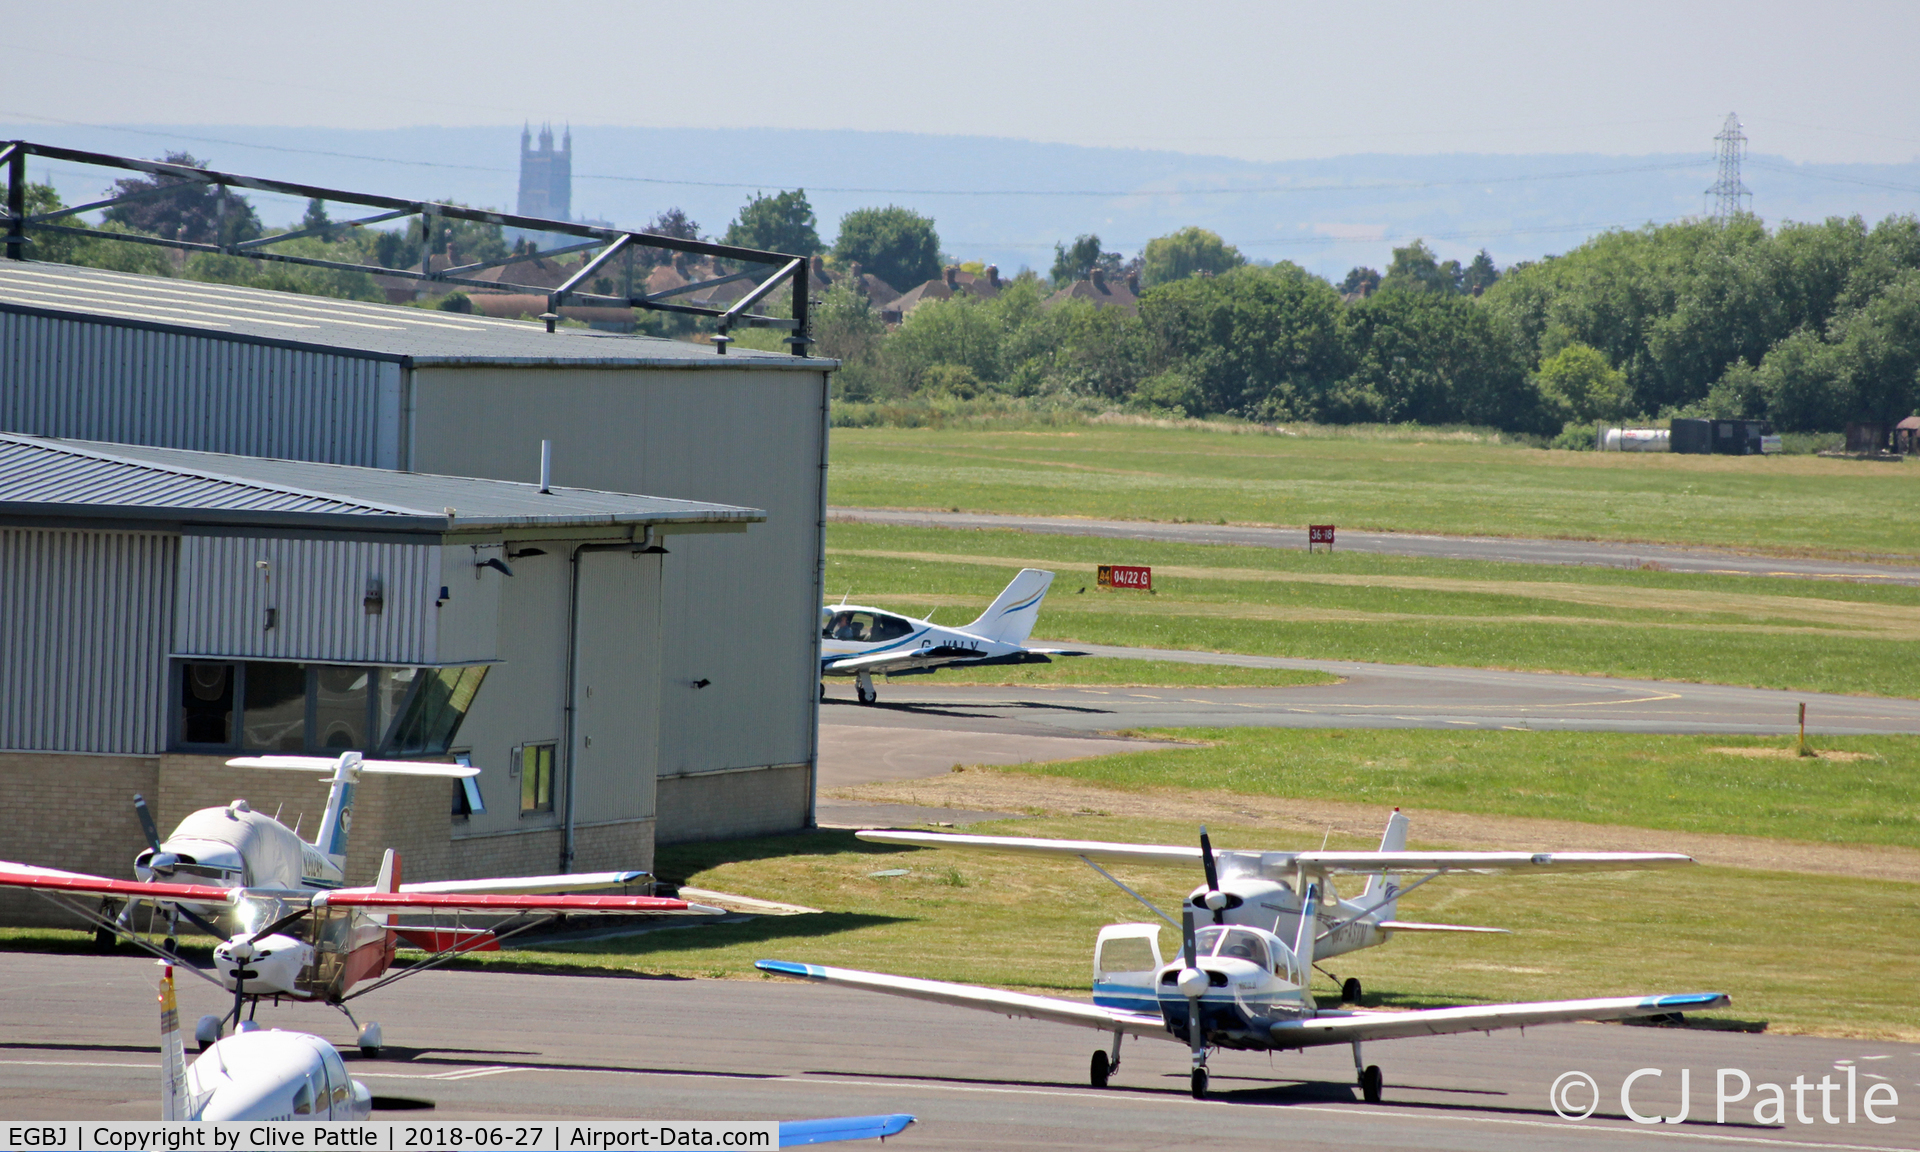 Gloucestershire Airport, Staverton, England United Kingdom (EGBJ) - General view looking west at EGBJ